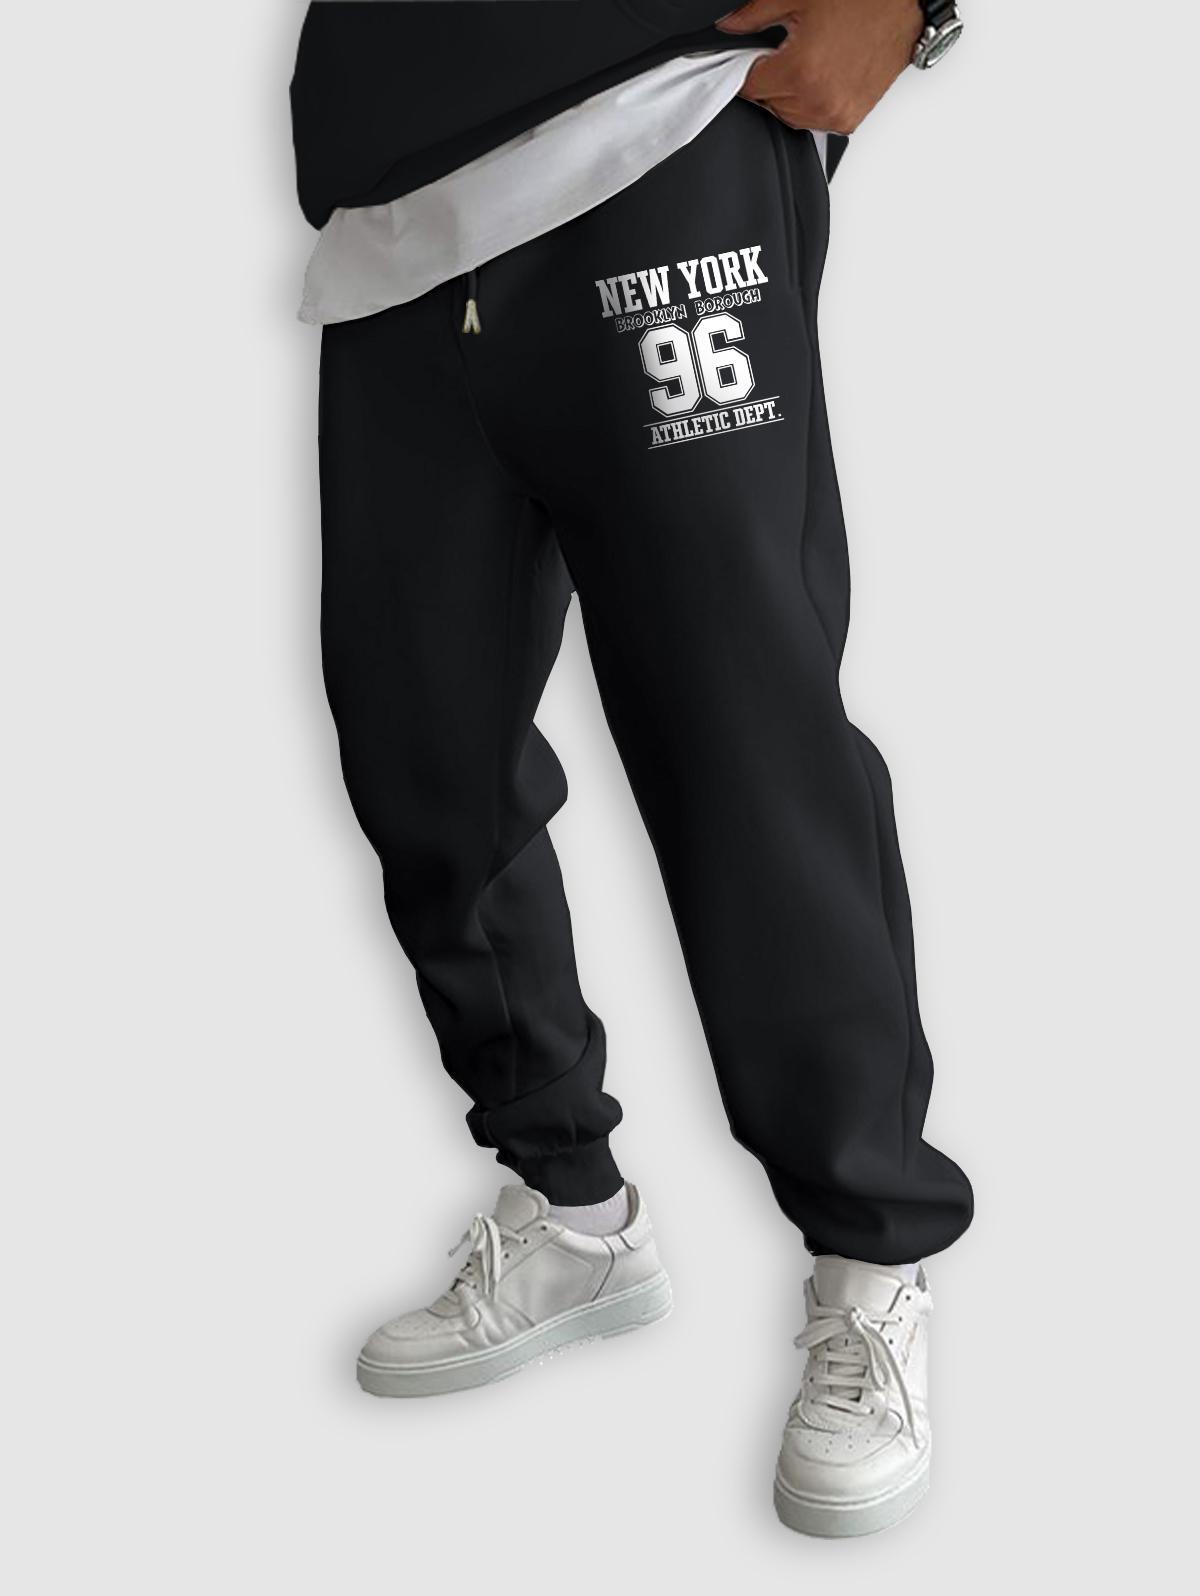 Men's Casual Simple Style BROOKLYN NEW YORK Letter Printed Fleece-lined  Beam Feet Drawstring Jogger Pants In BLACK